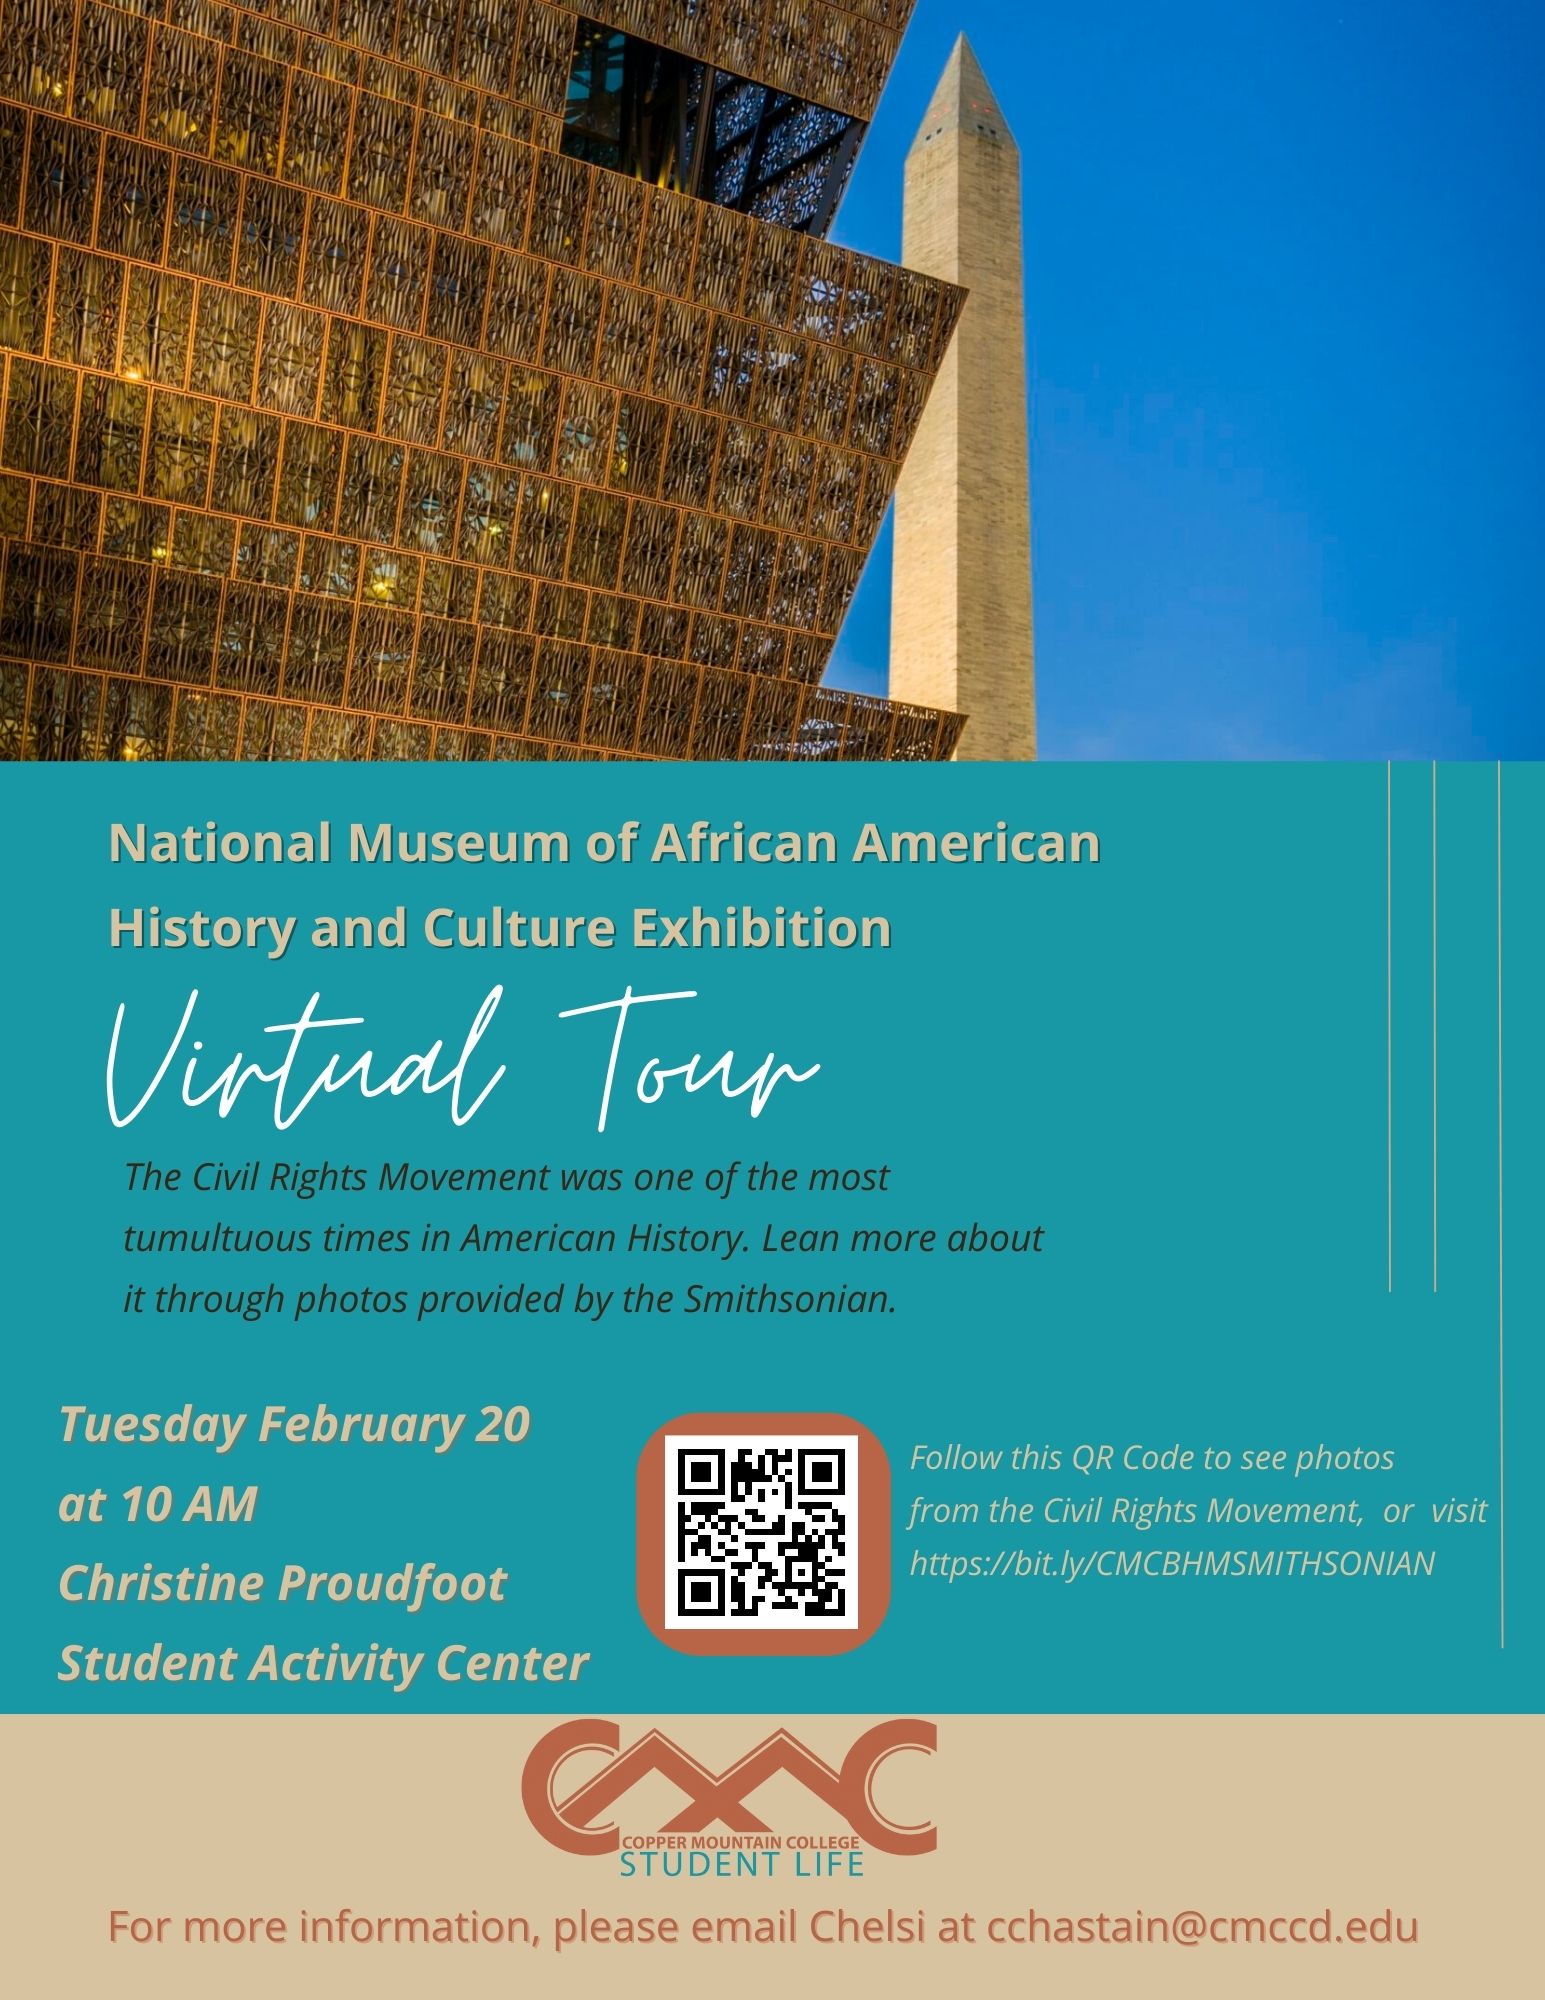 Take a virtual tour of the Civil Rights Movement on February 20th at 10 am